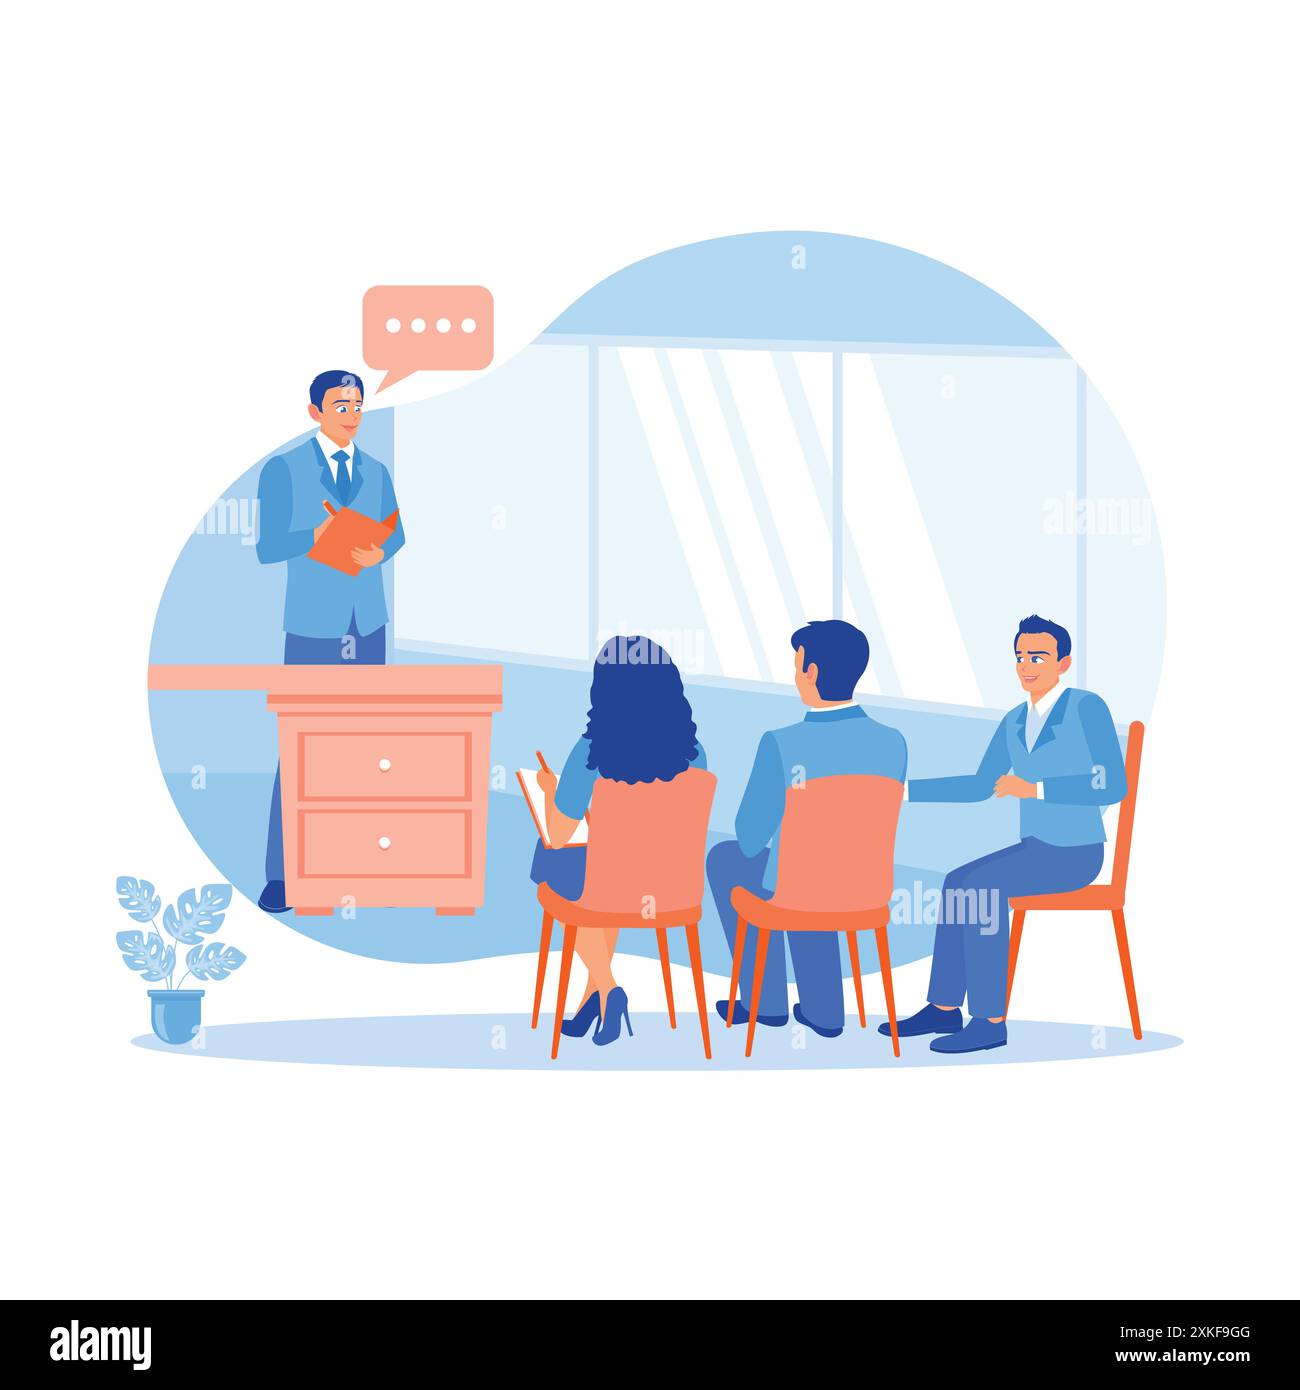 Male boss holding a meeting with employees in the office. Provide direction and discuss business ideas during meetings in the office. Briefings concep Stock Vector